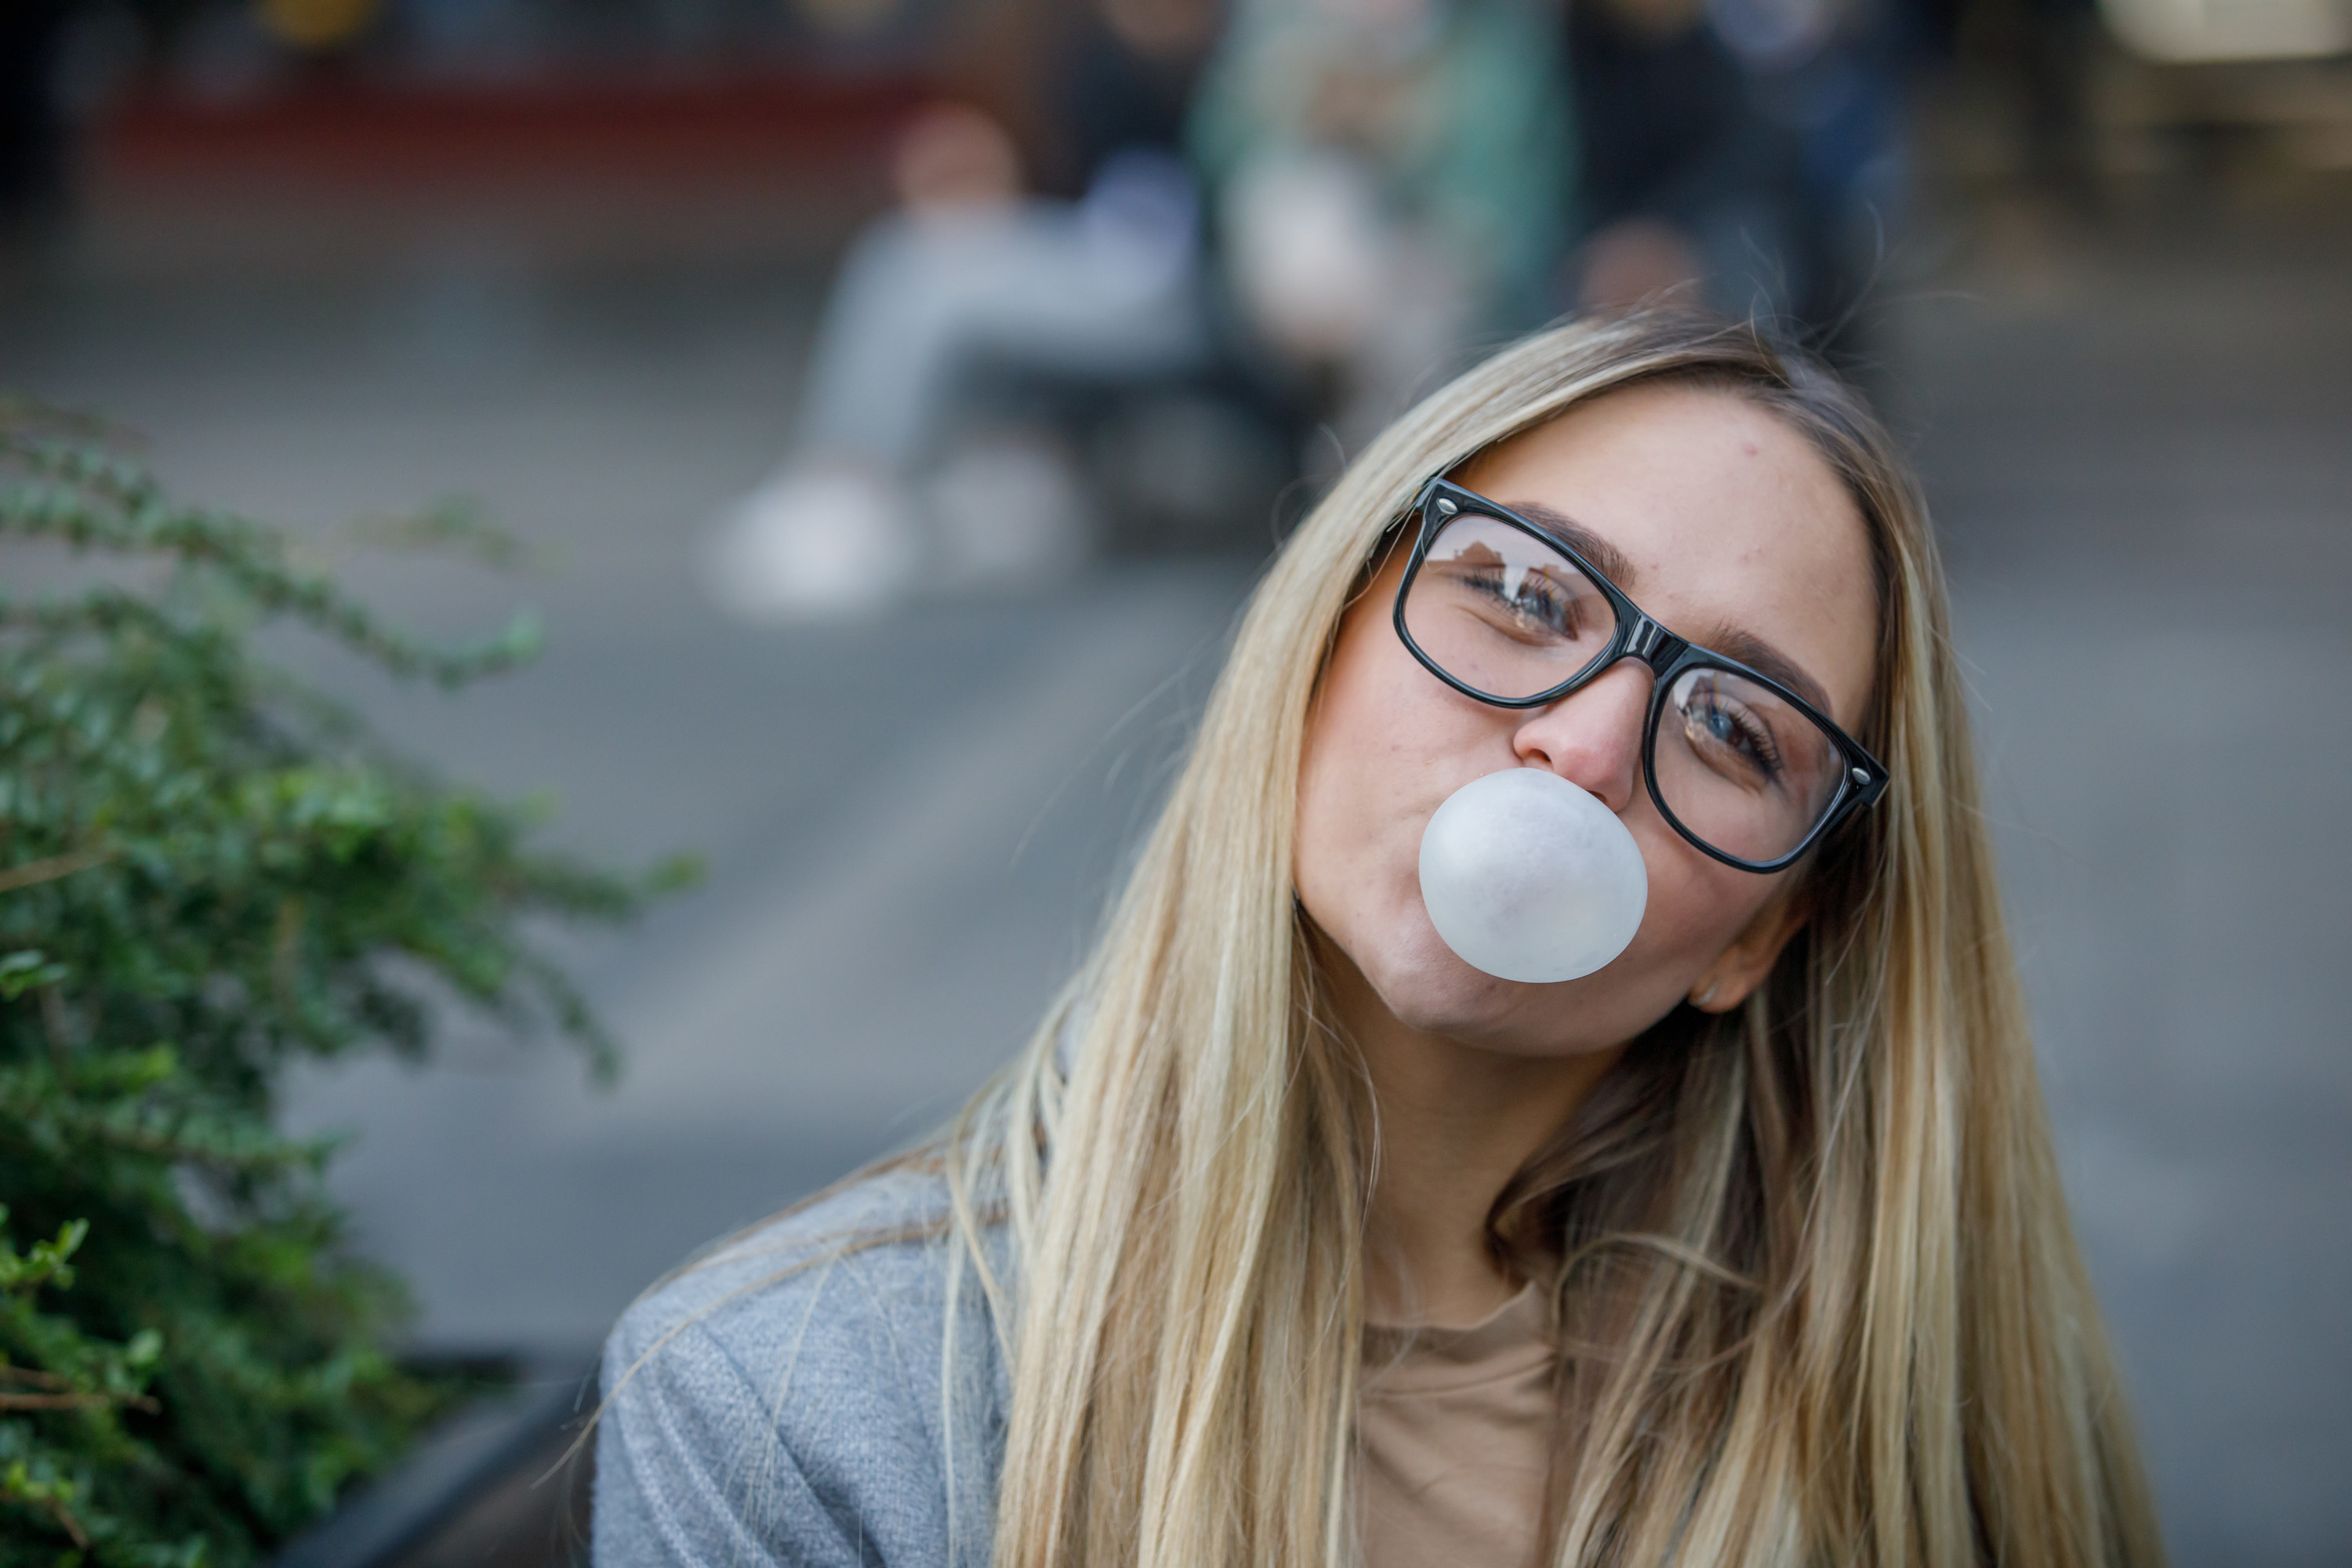 A young woman with long hair and glasses blowing a big bubble with gum